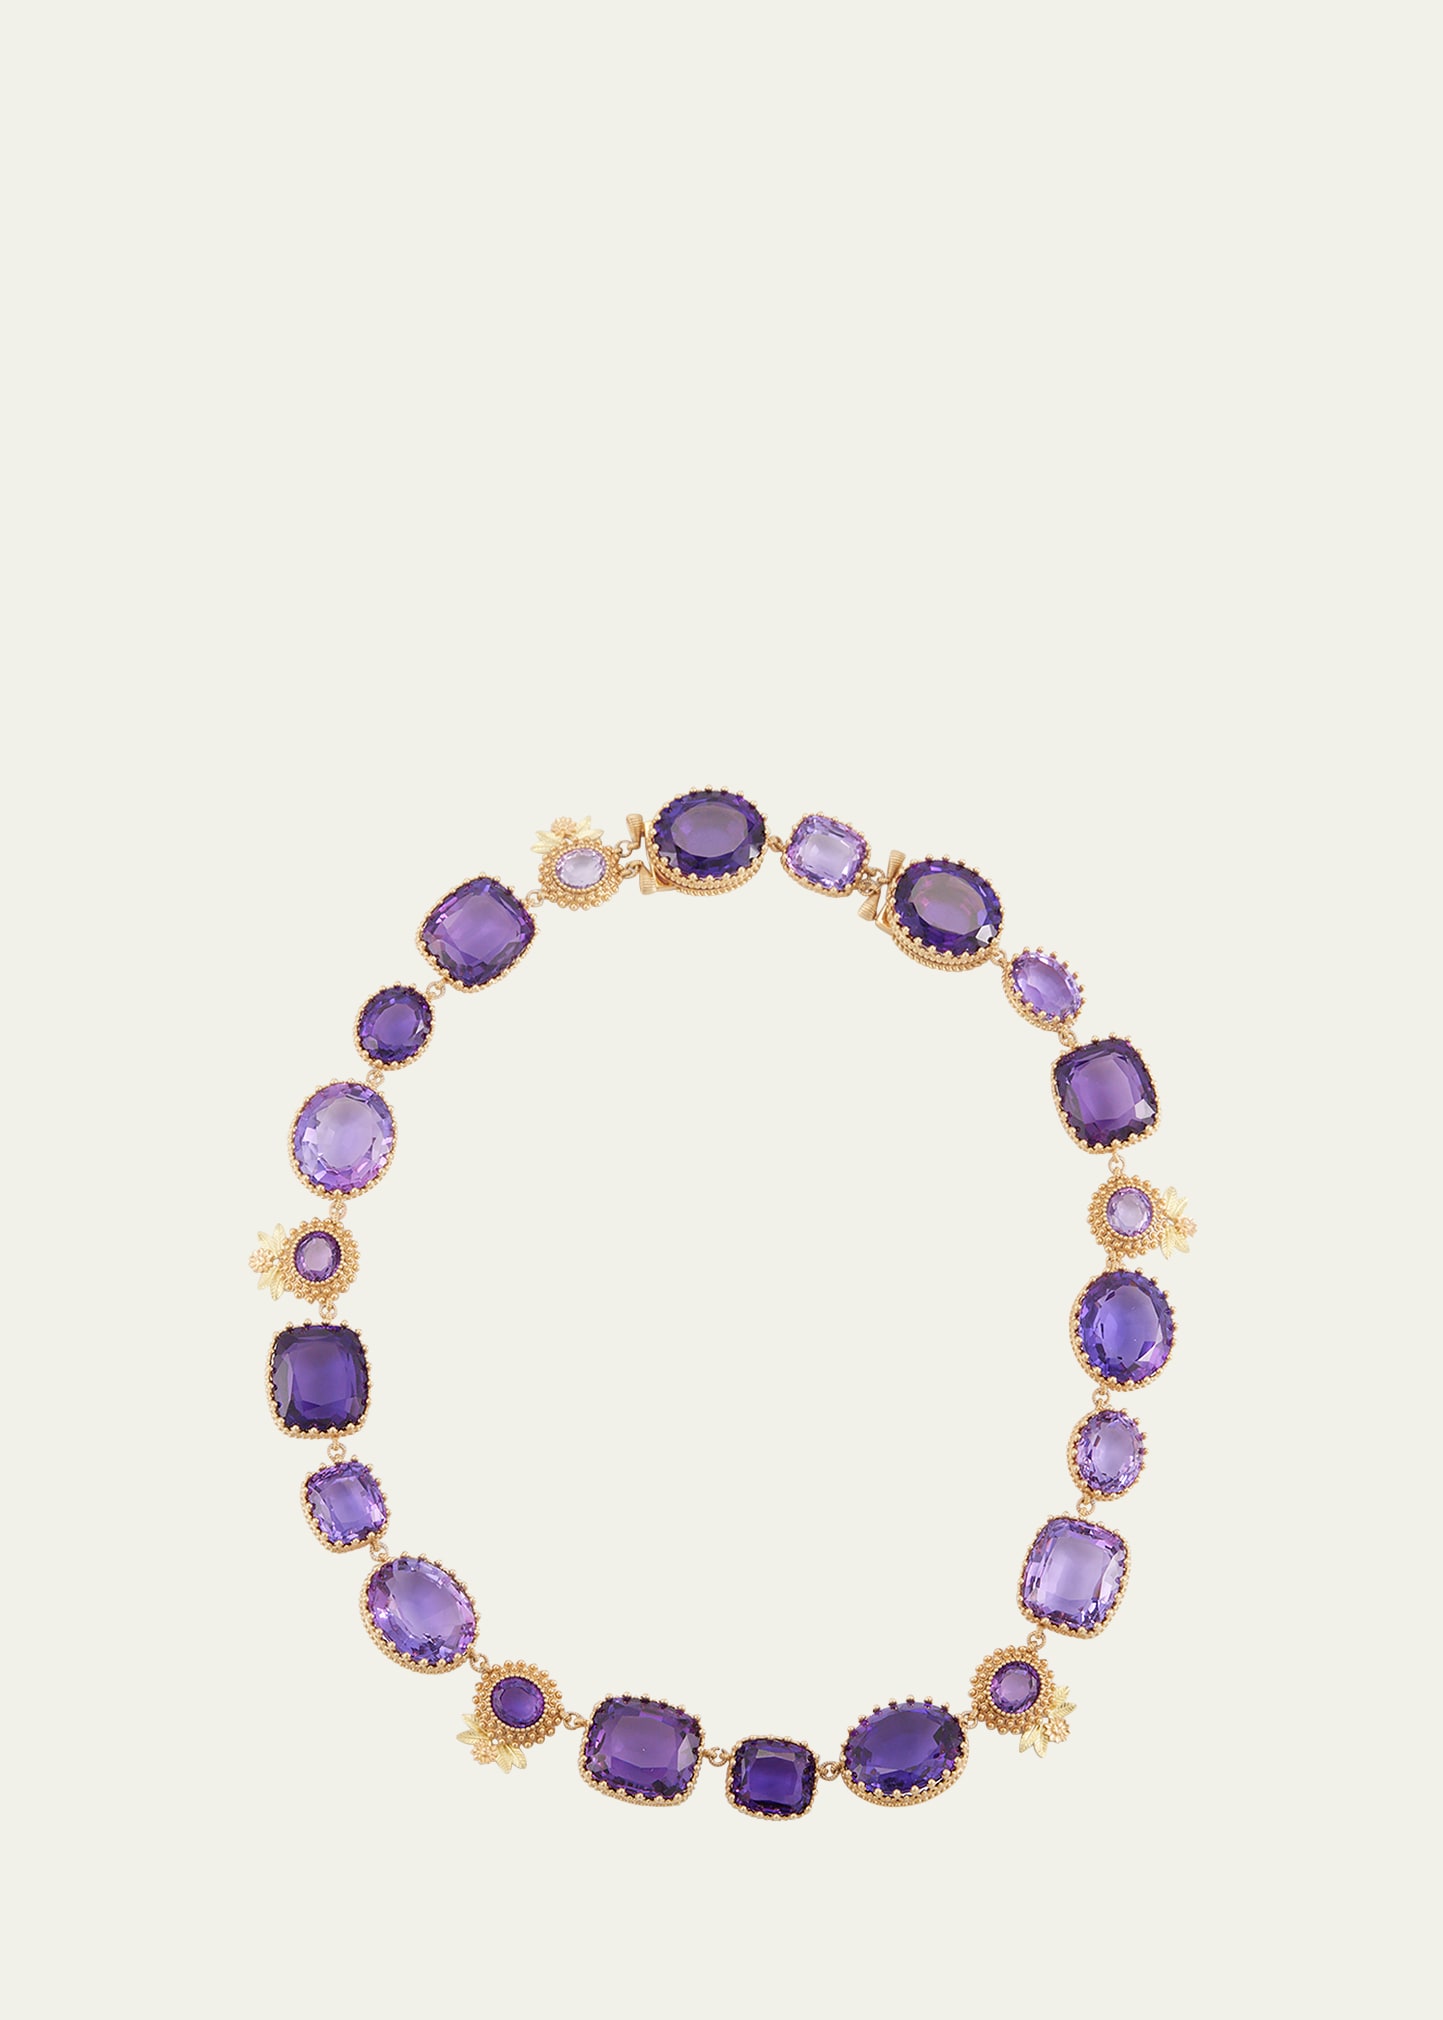 Mellerio 18k Yellow And Pink Gold Pierreries Necklace With Floral Pattern And Amethyst